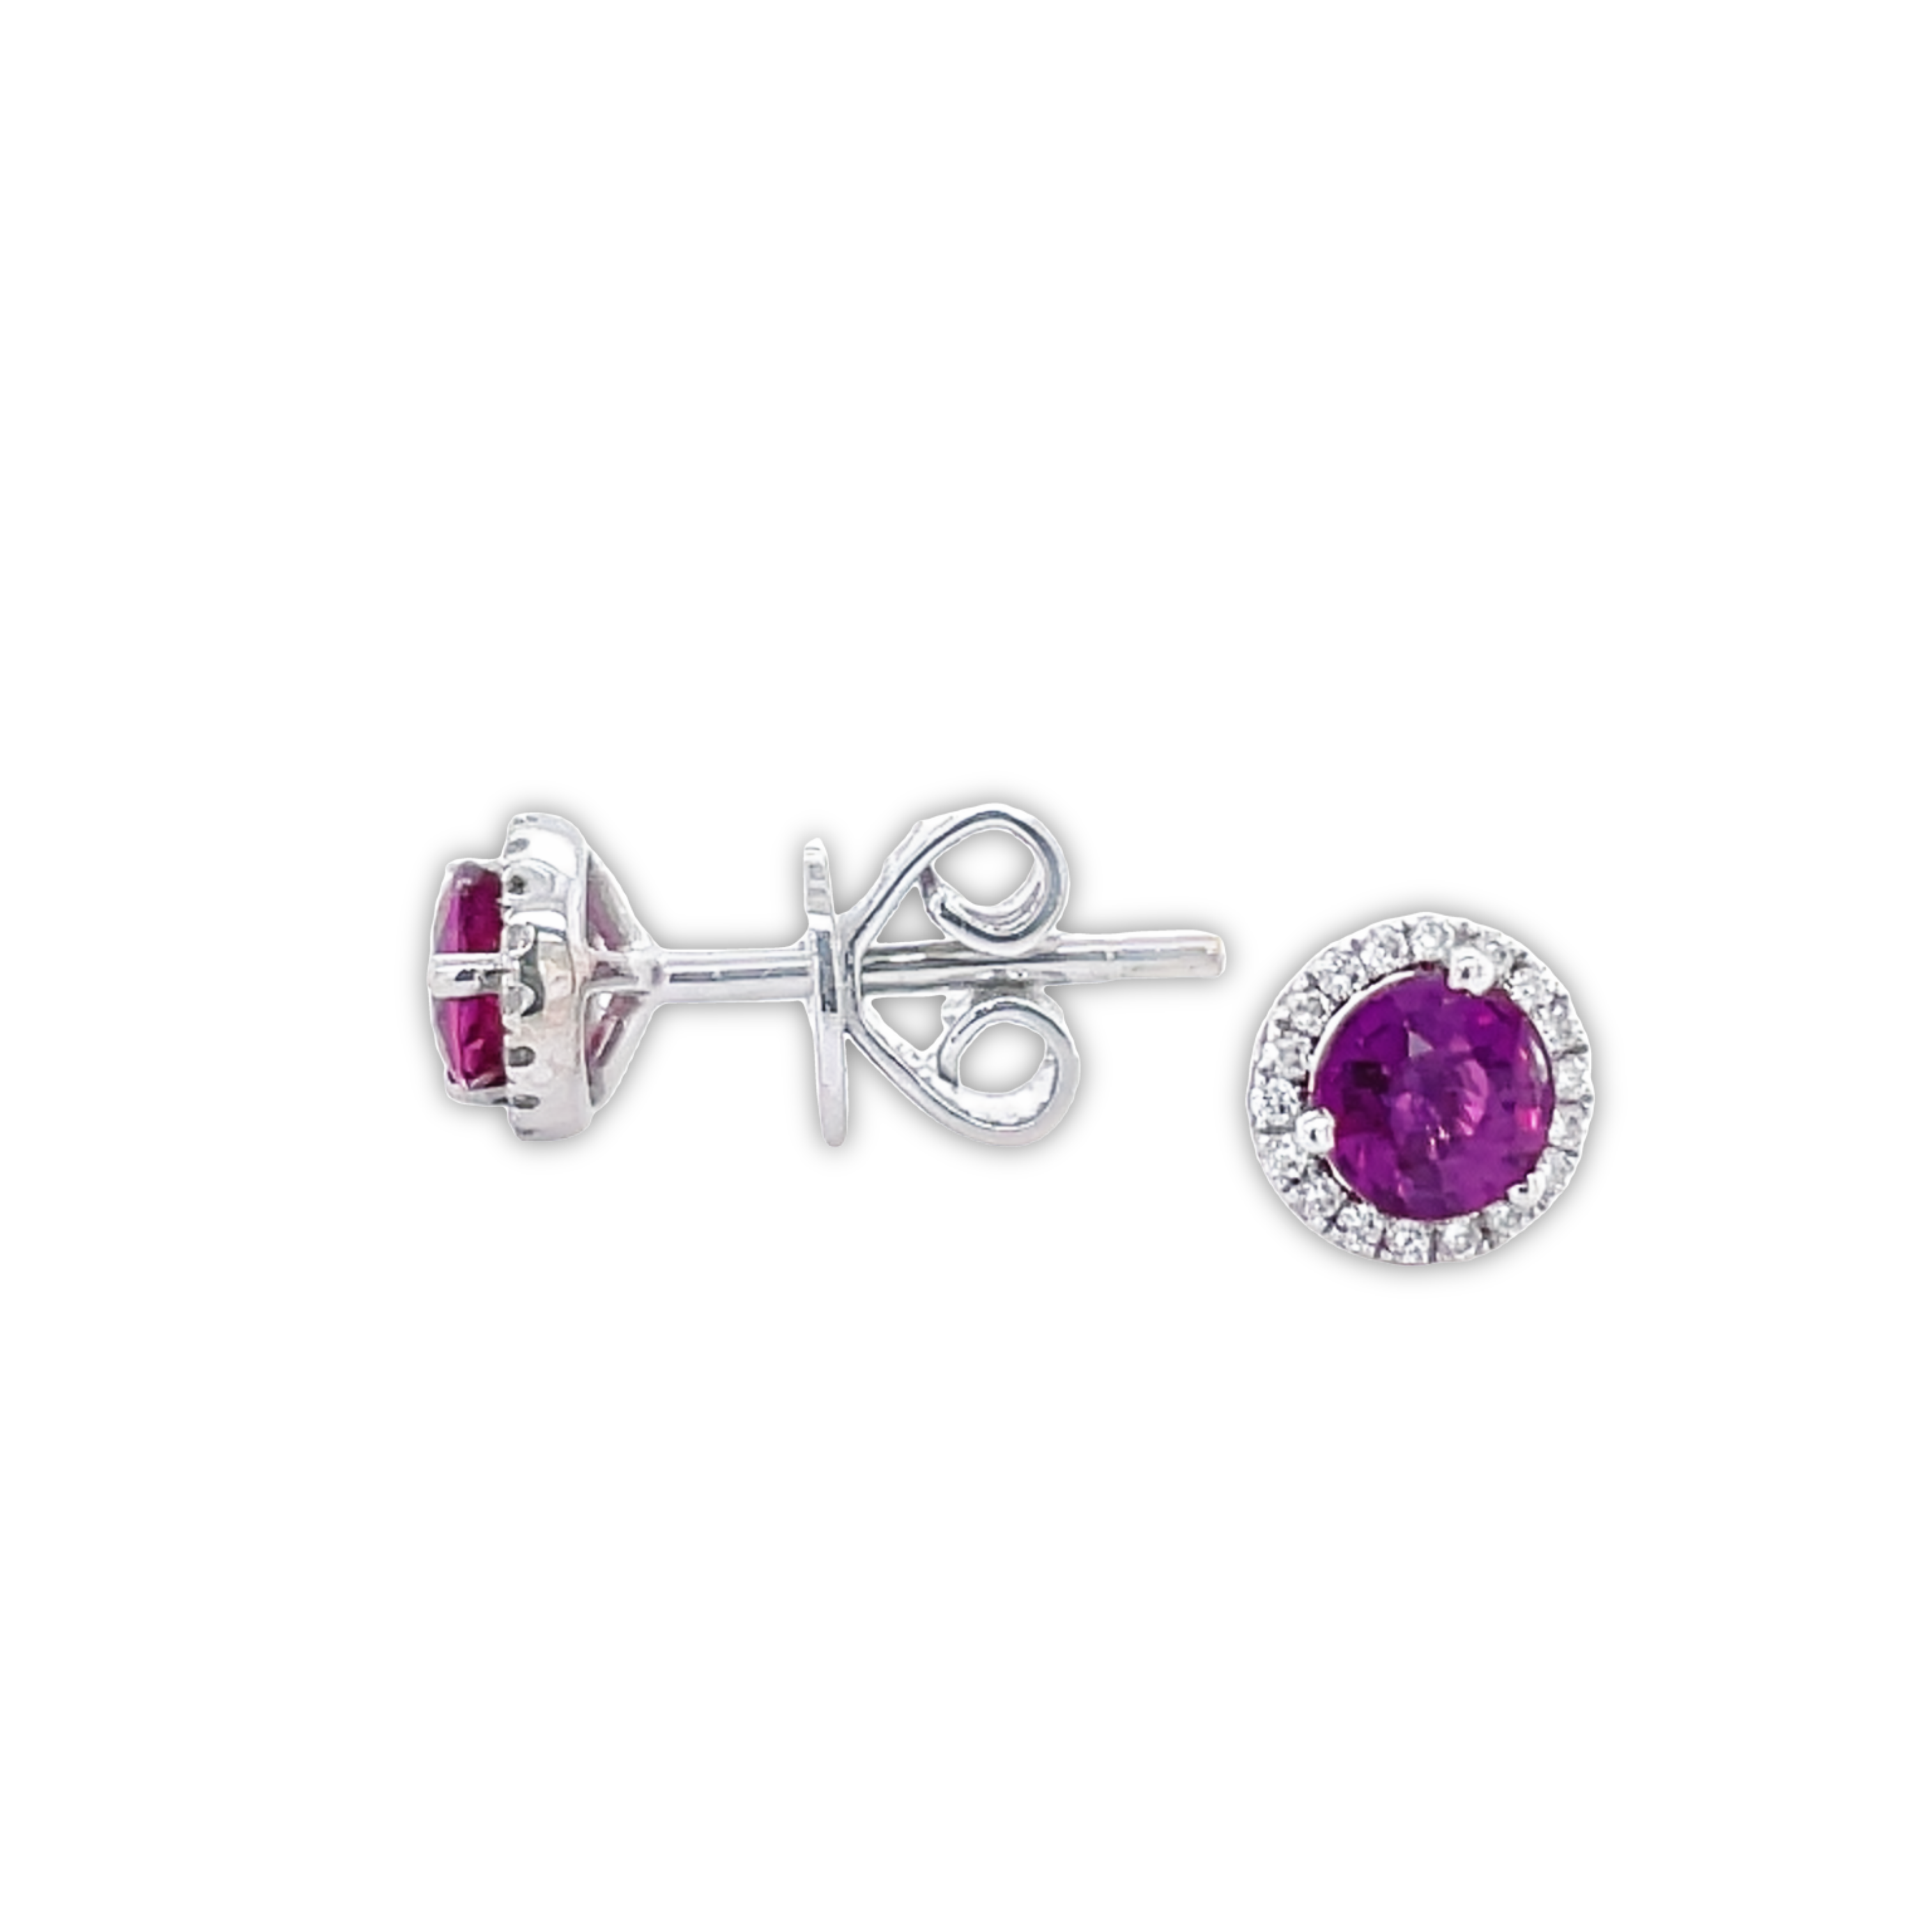 Pink tourmaline earrings    Round diamonds 0.15 cts  Set in 14k white gold mounting  Secure friction backs  5.40 mm 